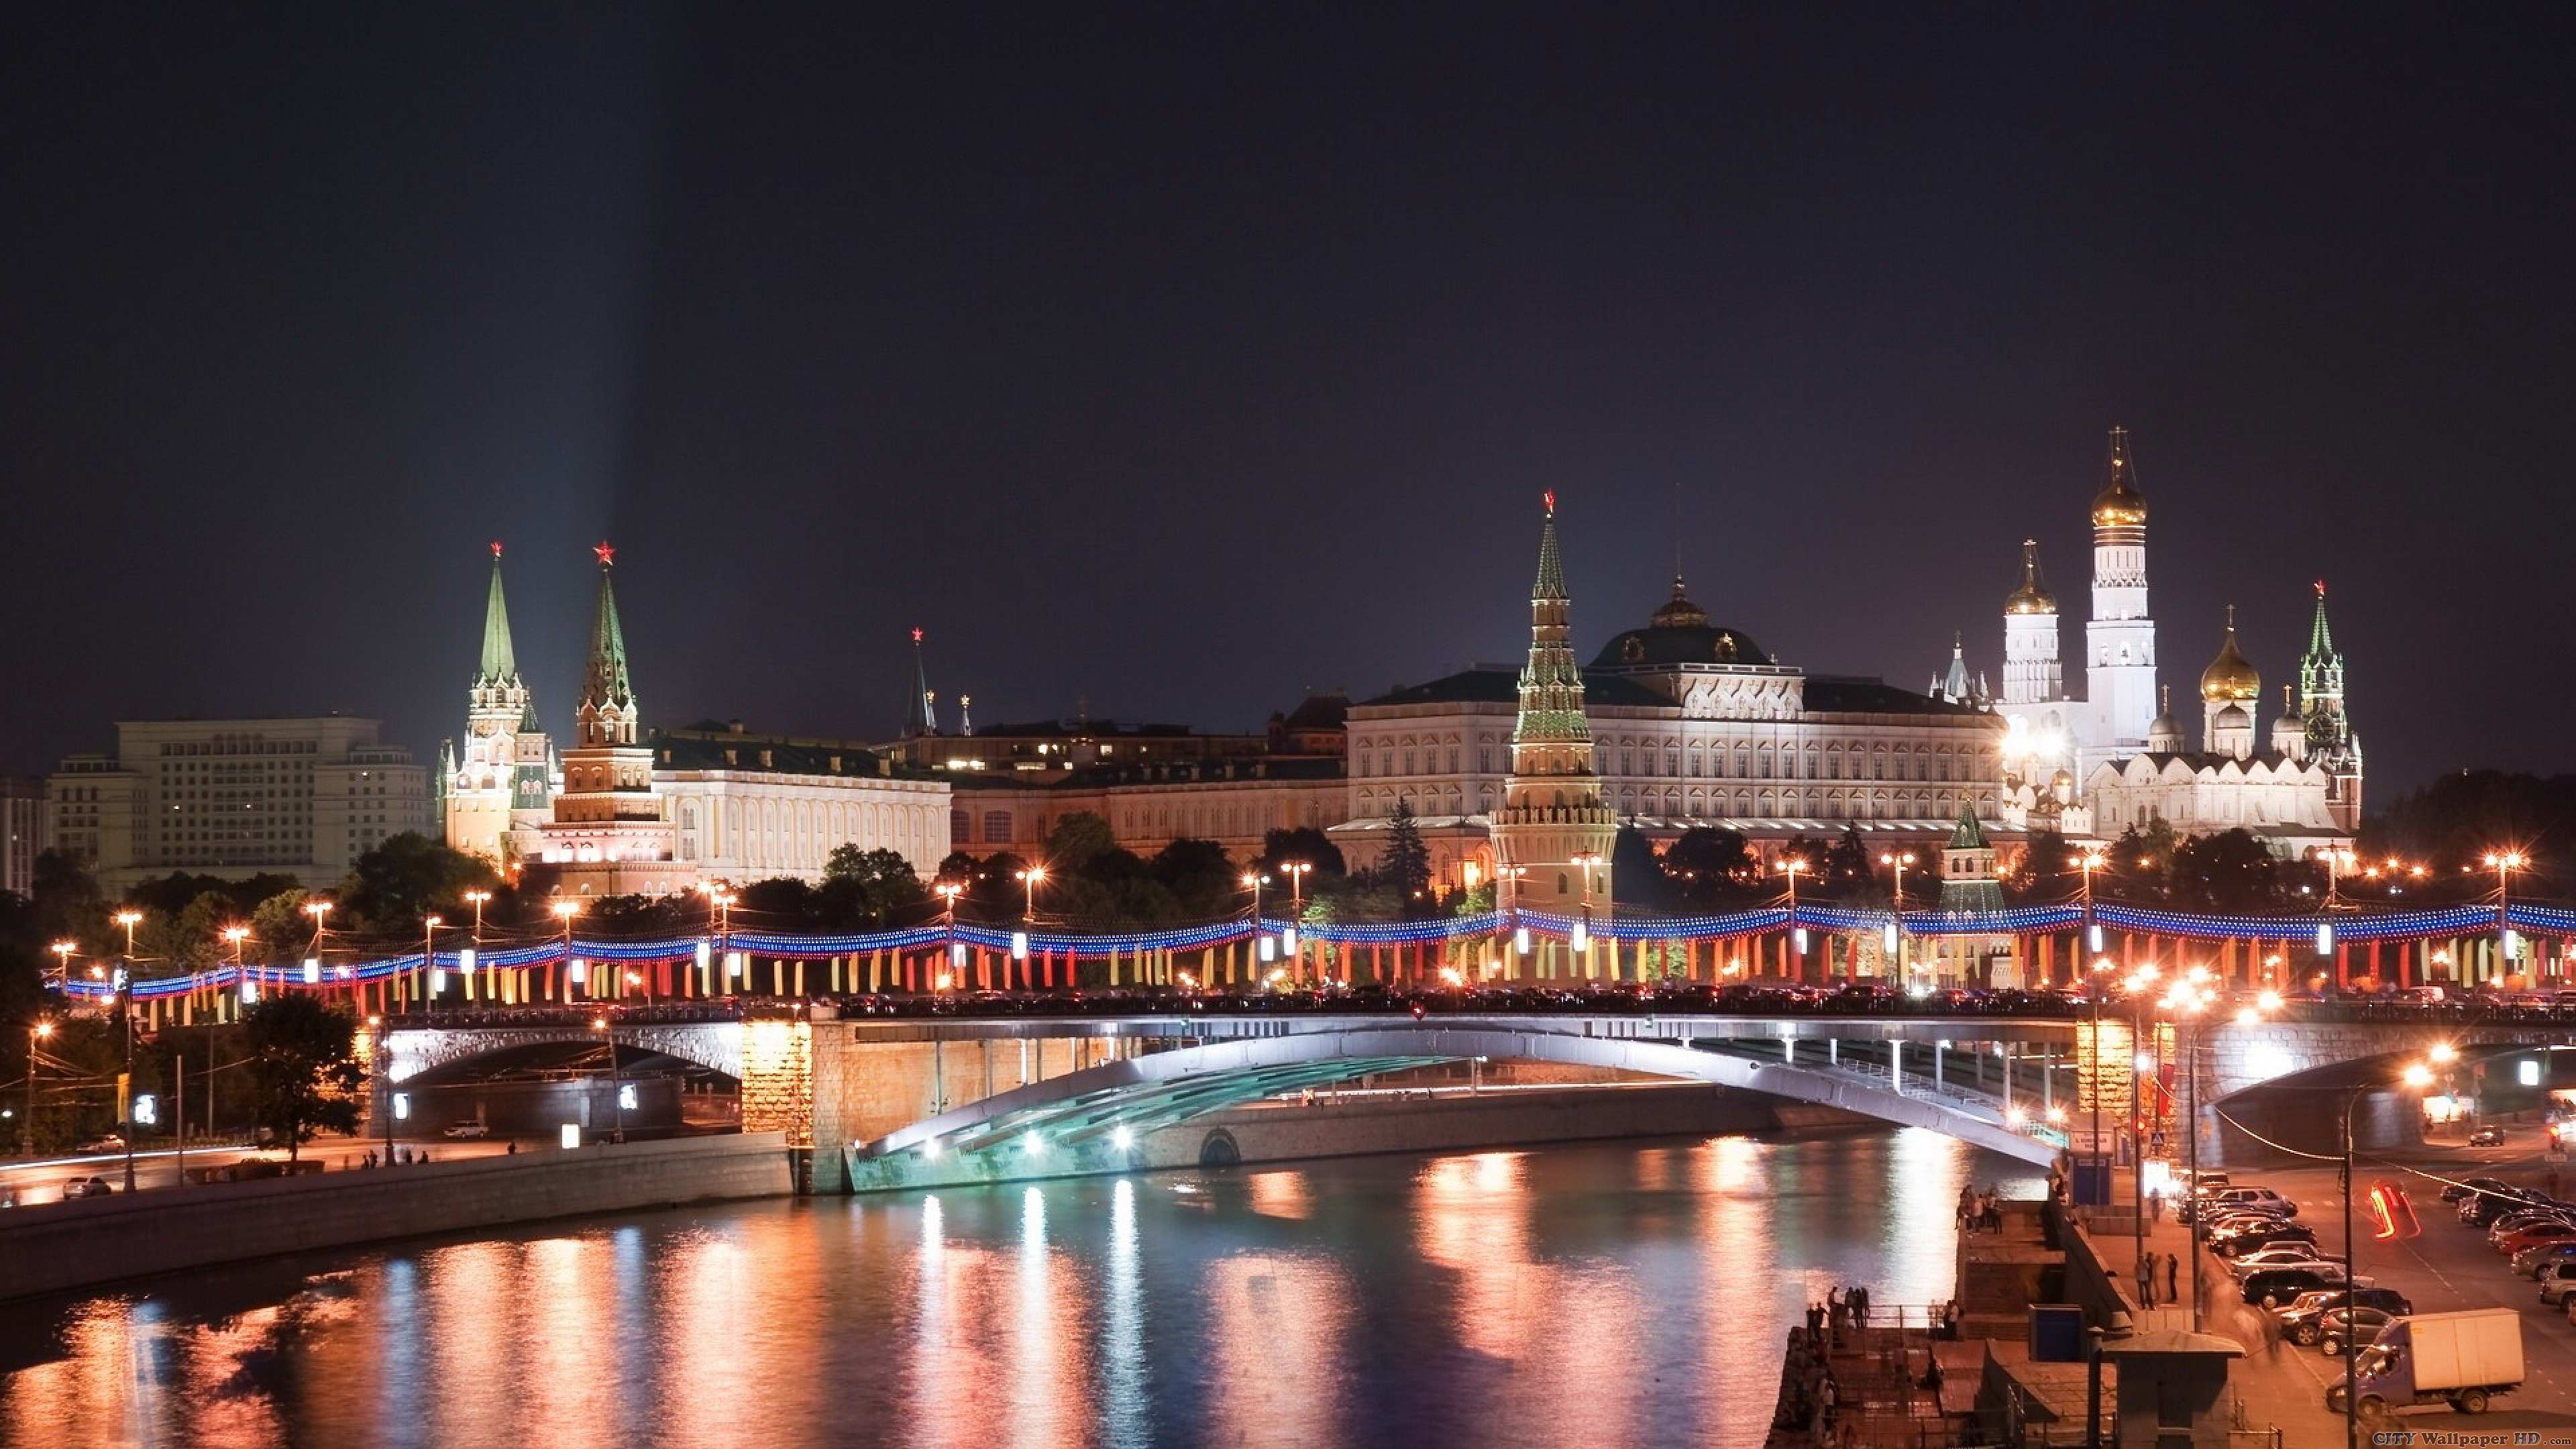 Moscow Kremlin. Cities of the world. Moscow, Russia, river, bridge